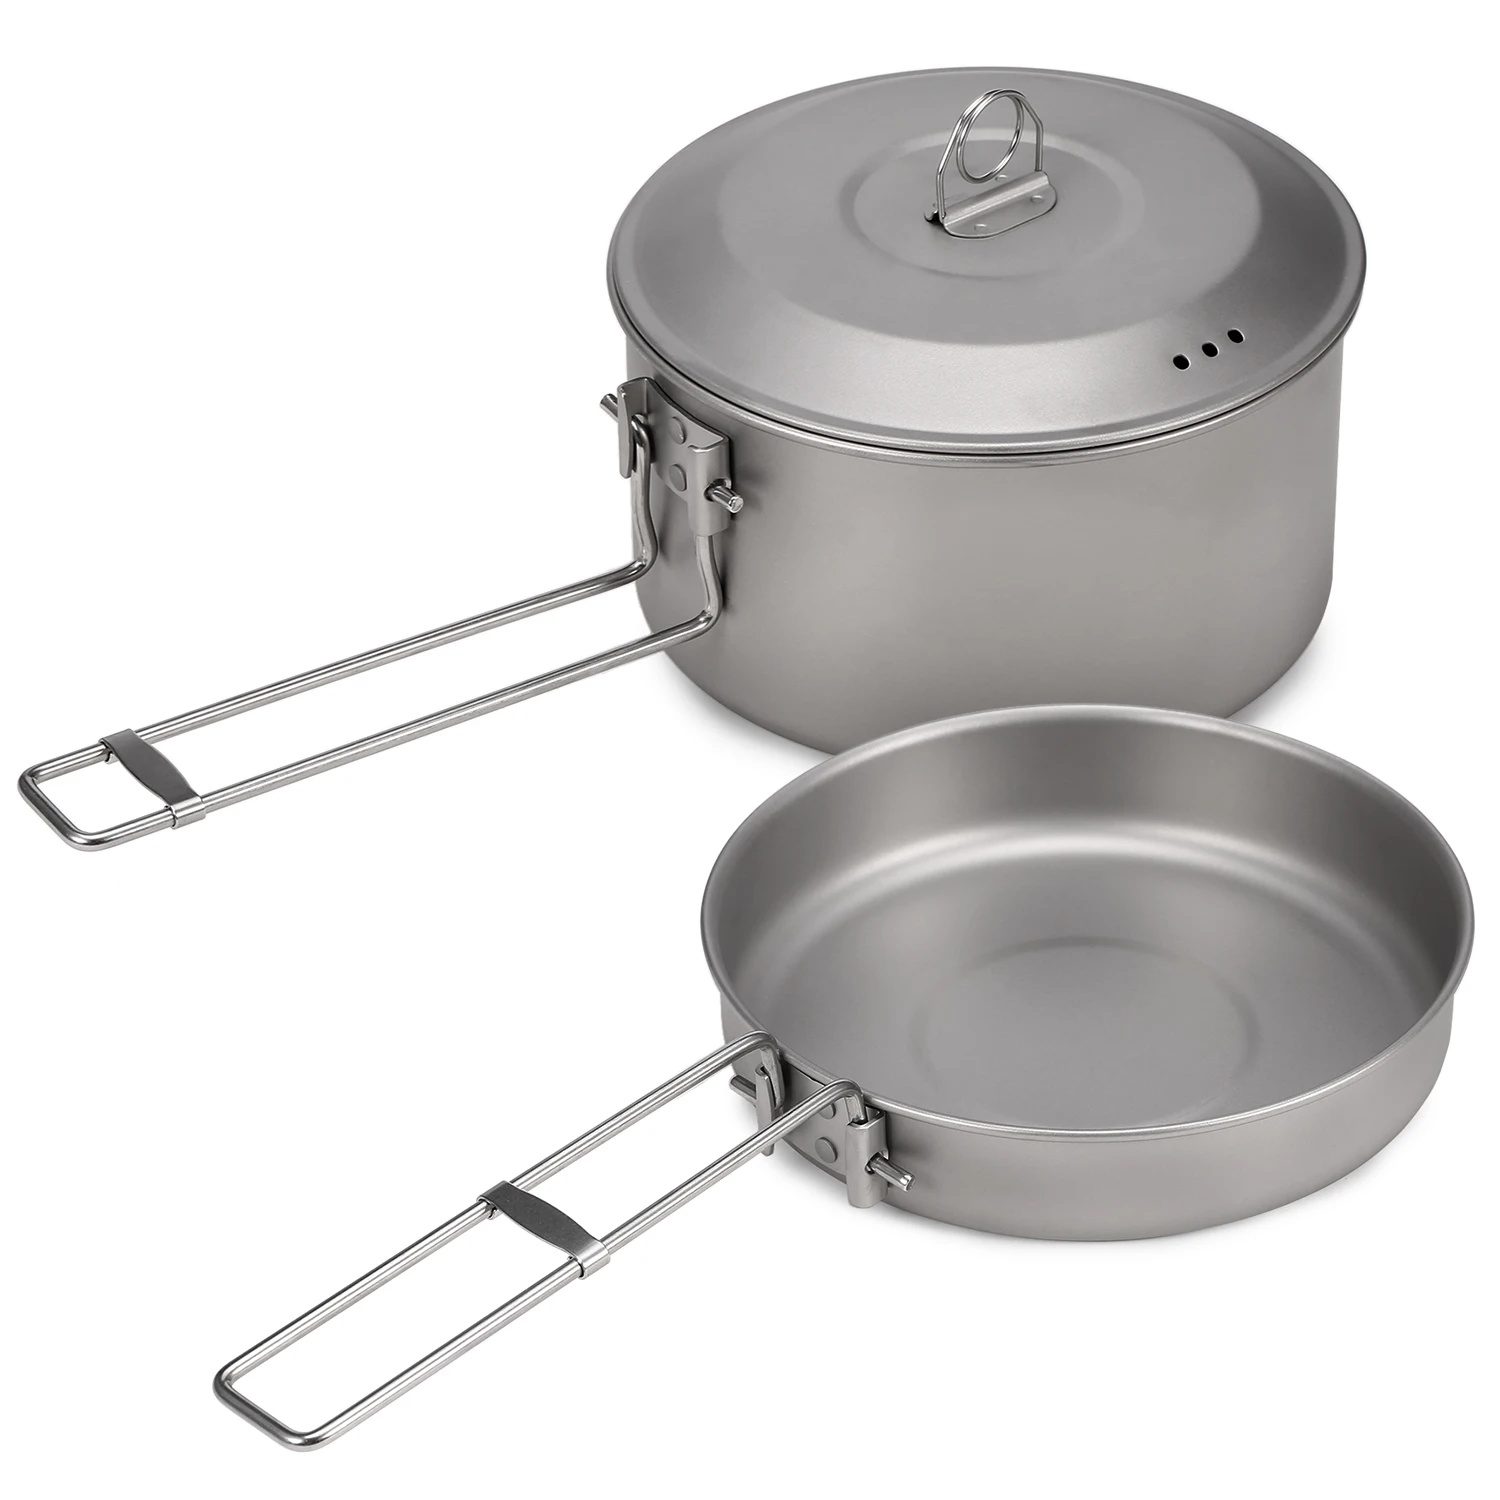 

Camping Cookware Set Titanium Pot and Fry Pan Set with Lid and Foldable Handles for Outdoor Camping Hiking Backpacking Picnic